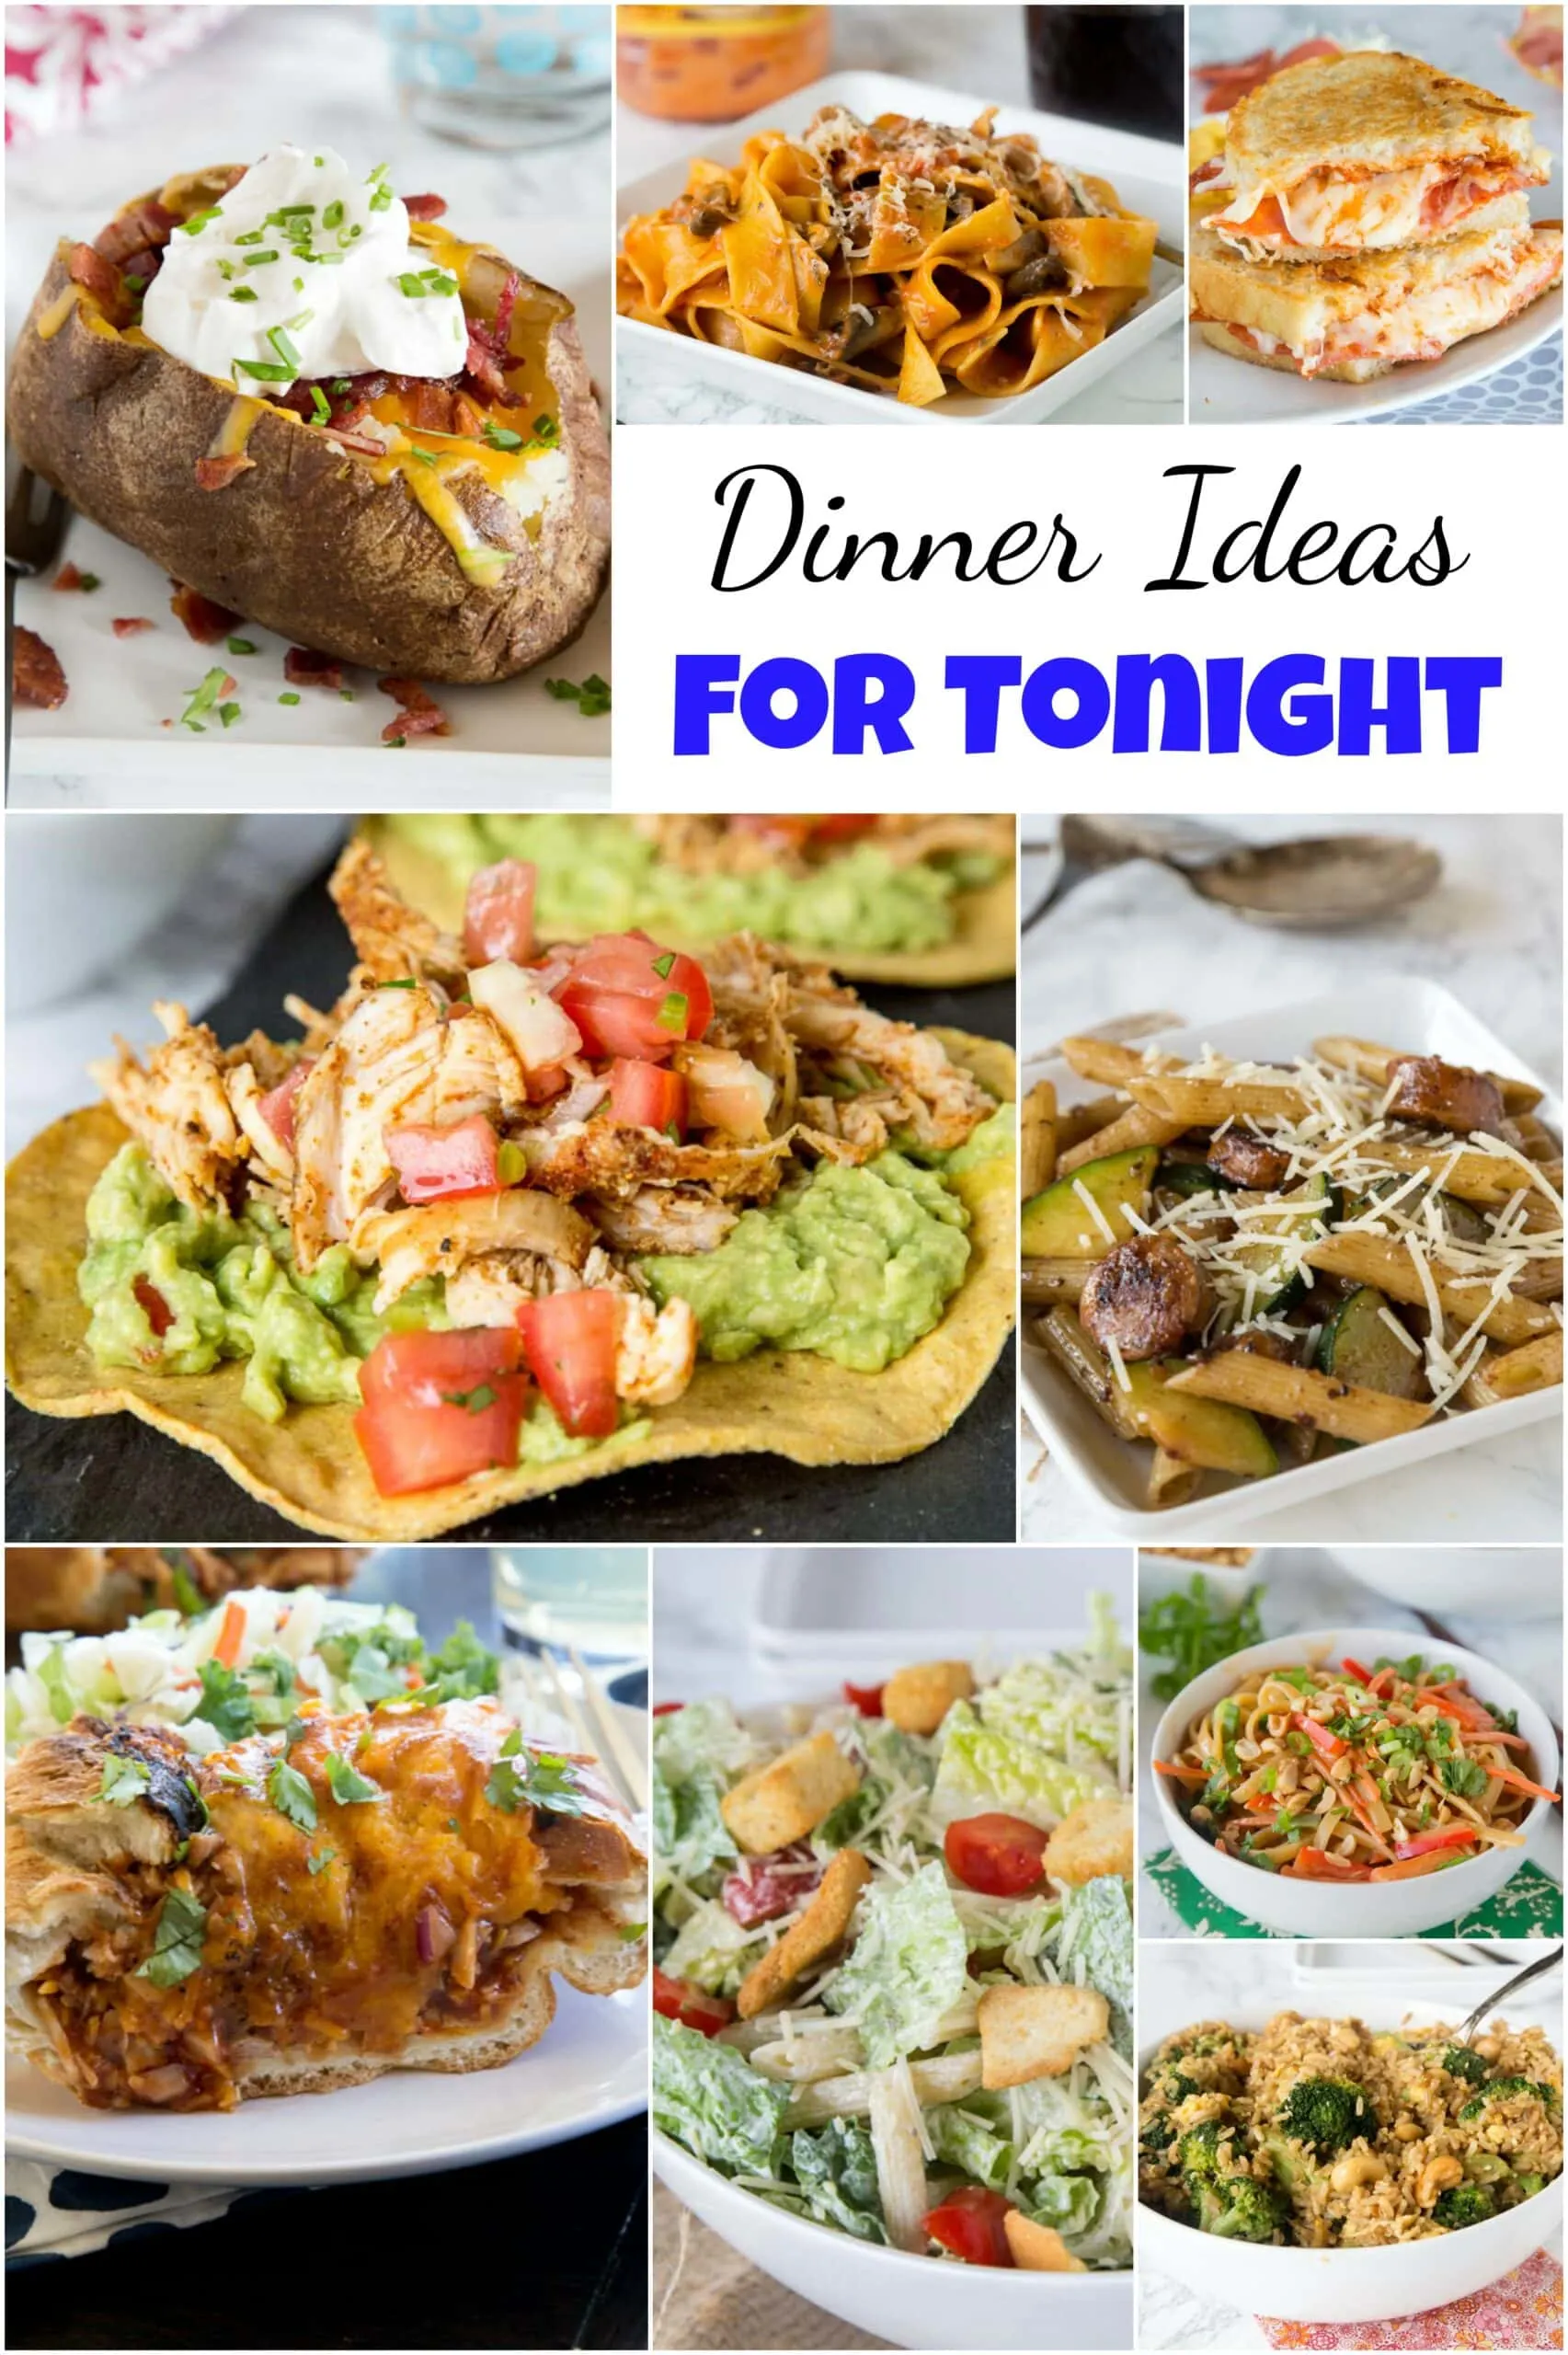 Dinner Ideas for Tonight - looking for something you can make tonight?  Don't have a plan, don't have a lot of time or stuff prepped?  Here are 25 great dinner ideas you can make with no planning ahead!  #dinner #dinnerideas #dinnertime #dinnerrecipes #recipes